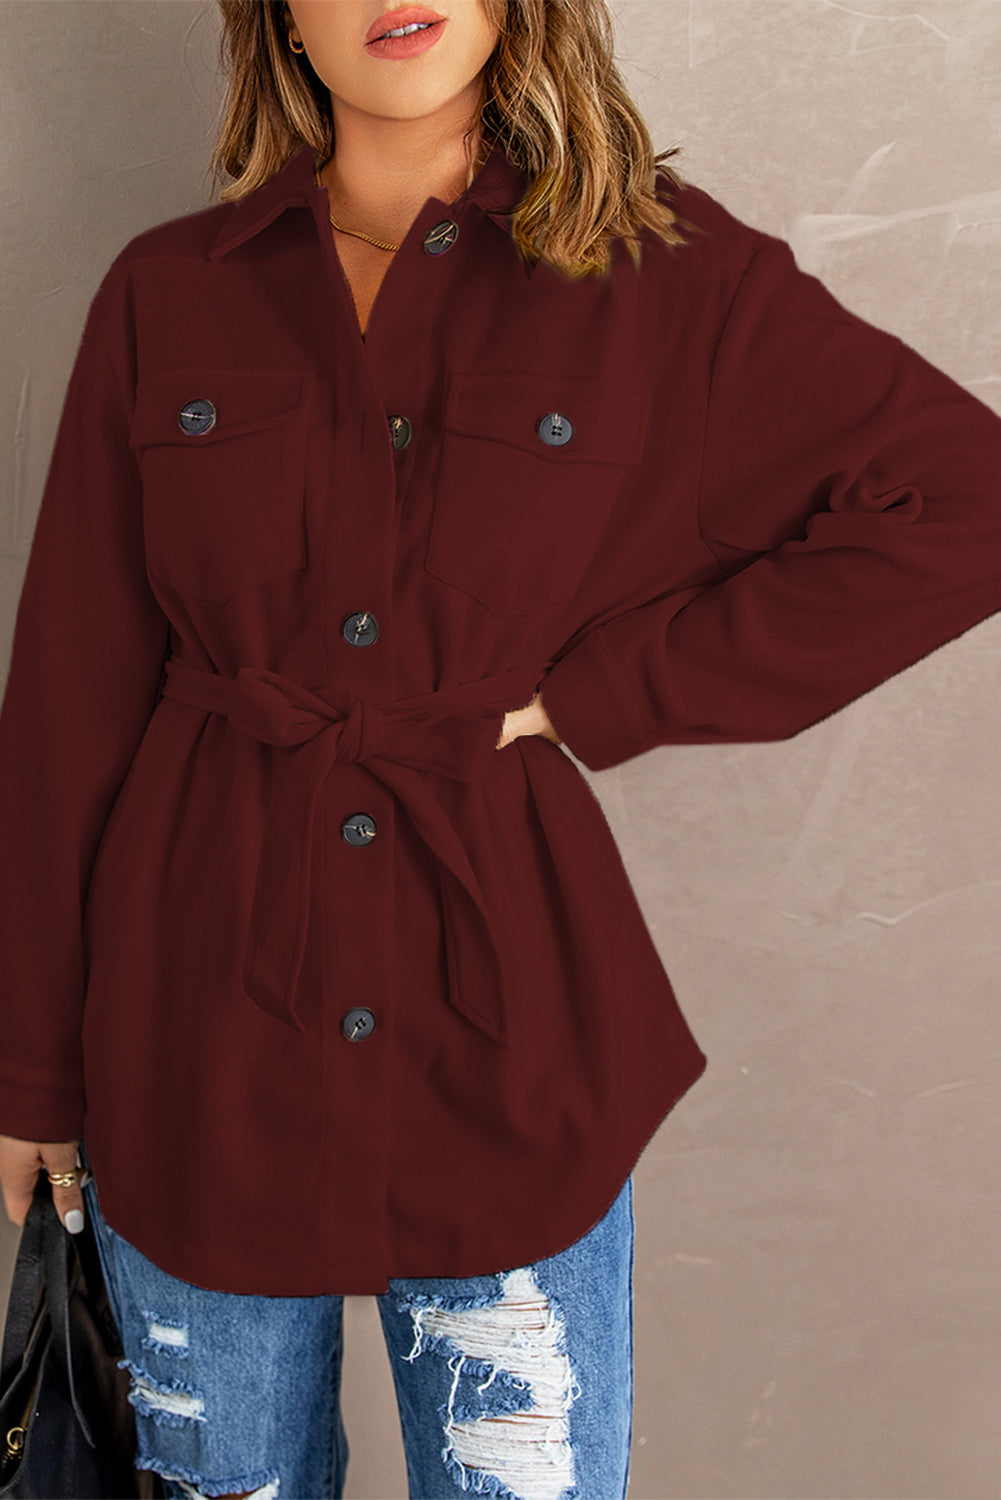 Red Women's Lapel Button Down Coat Winter Belted Coat with Pockets LC8511359-3